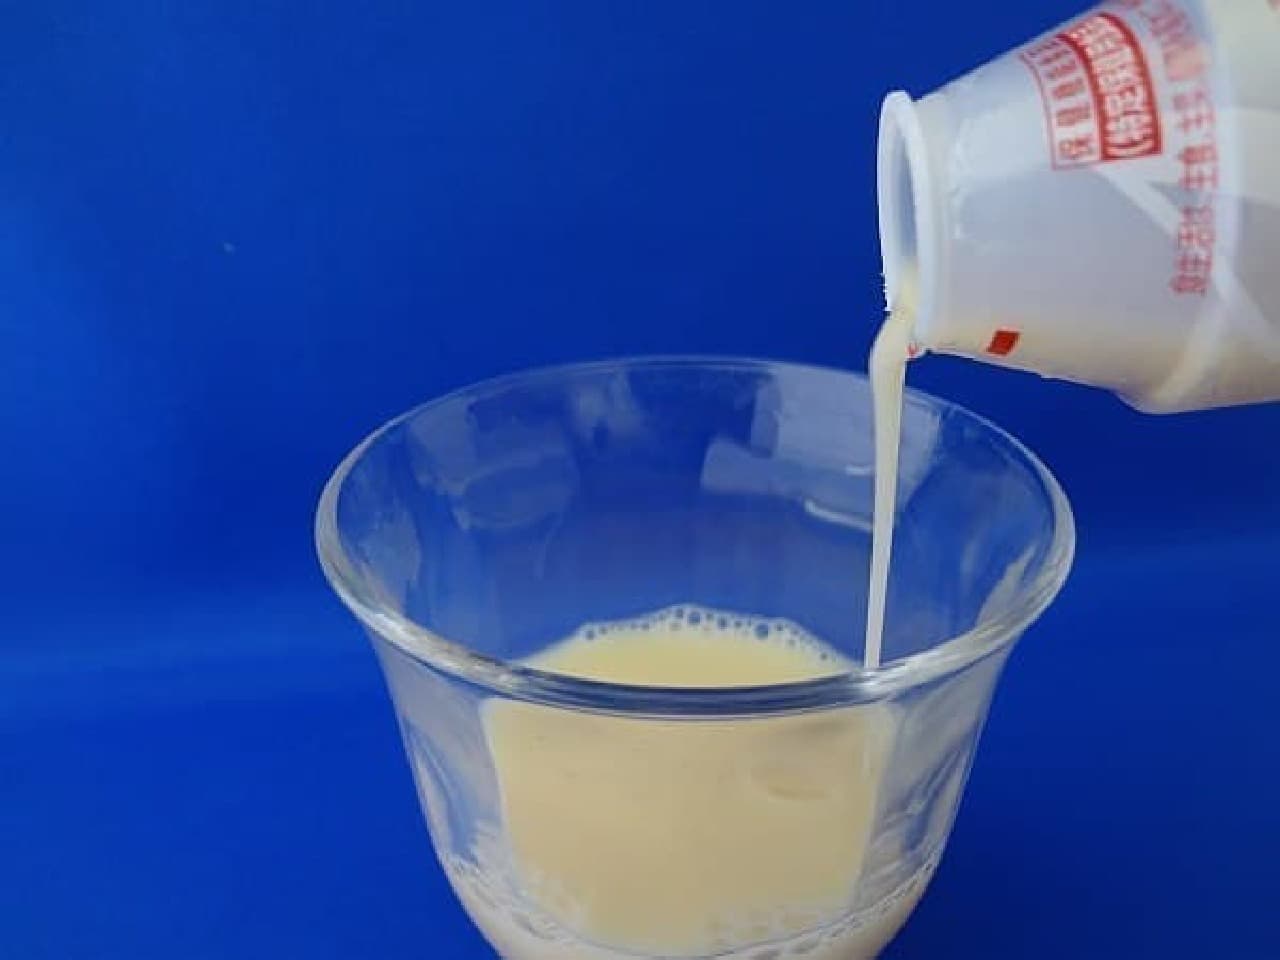 Pour Yakult into a glass